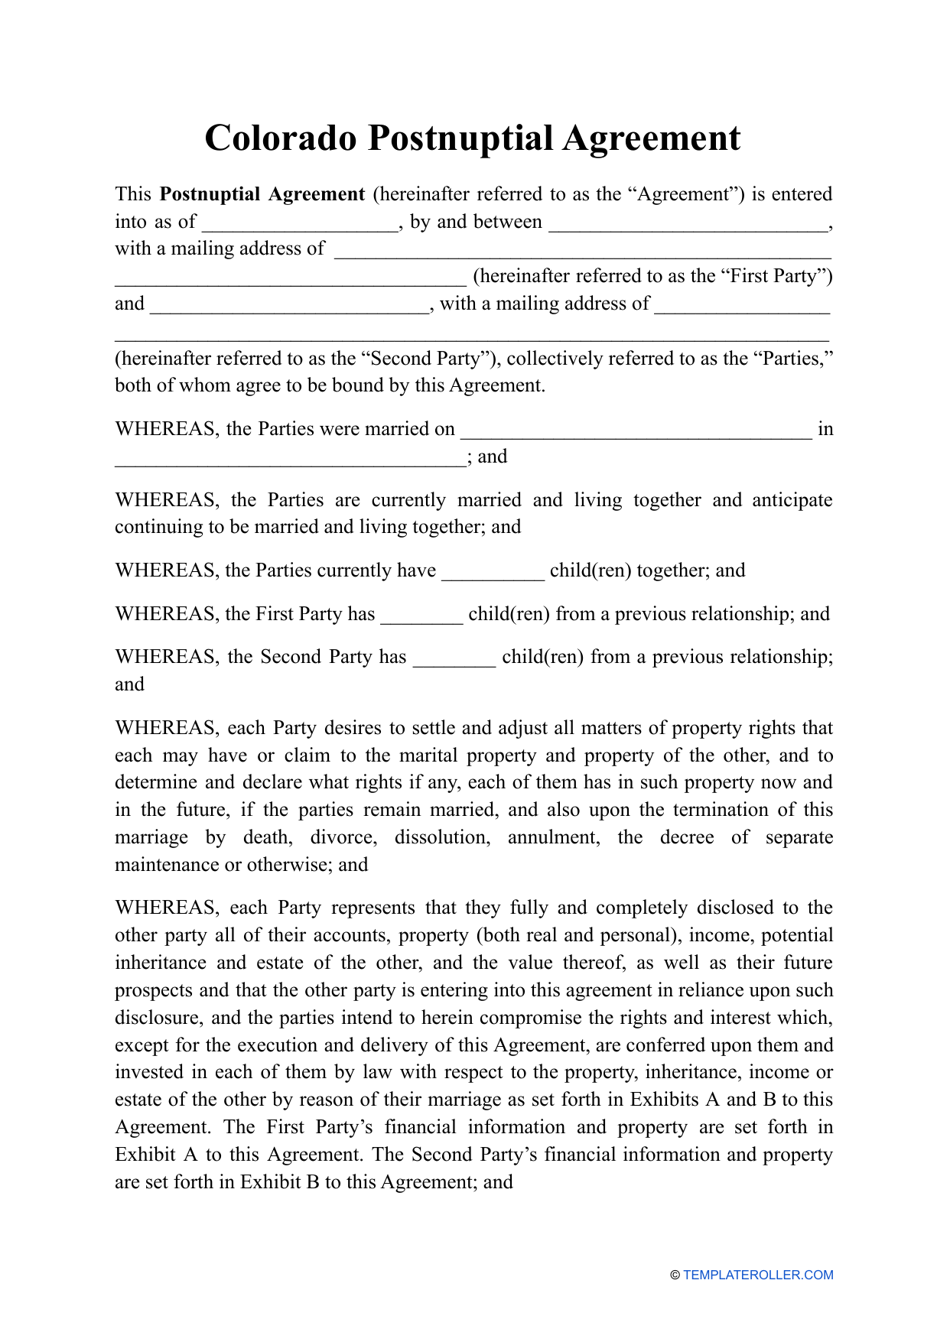 Postnuptial Agreement Template - Colorado, Page 1